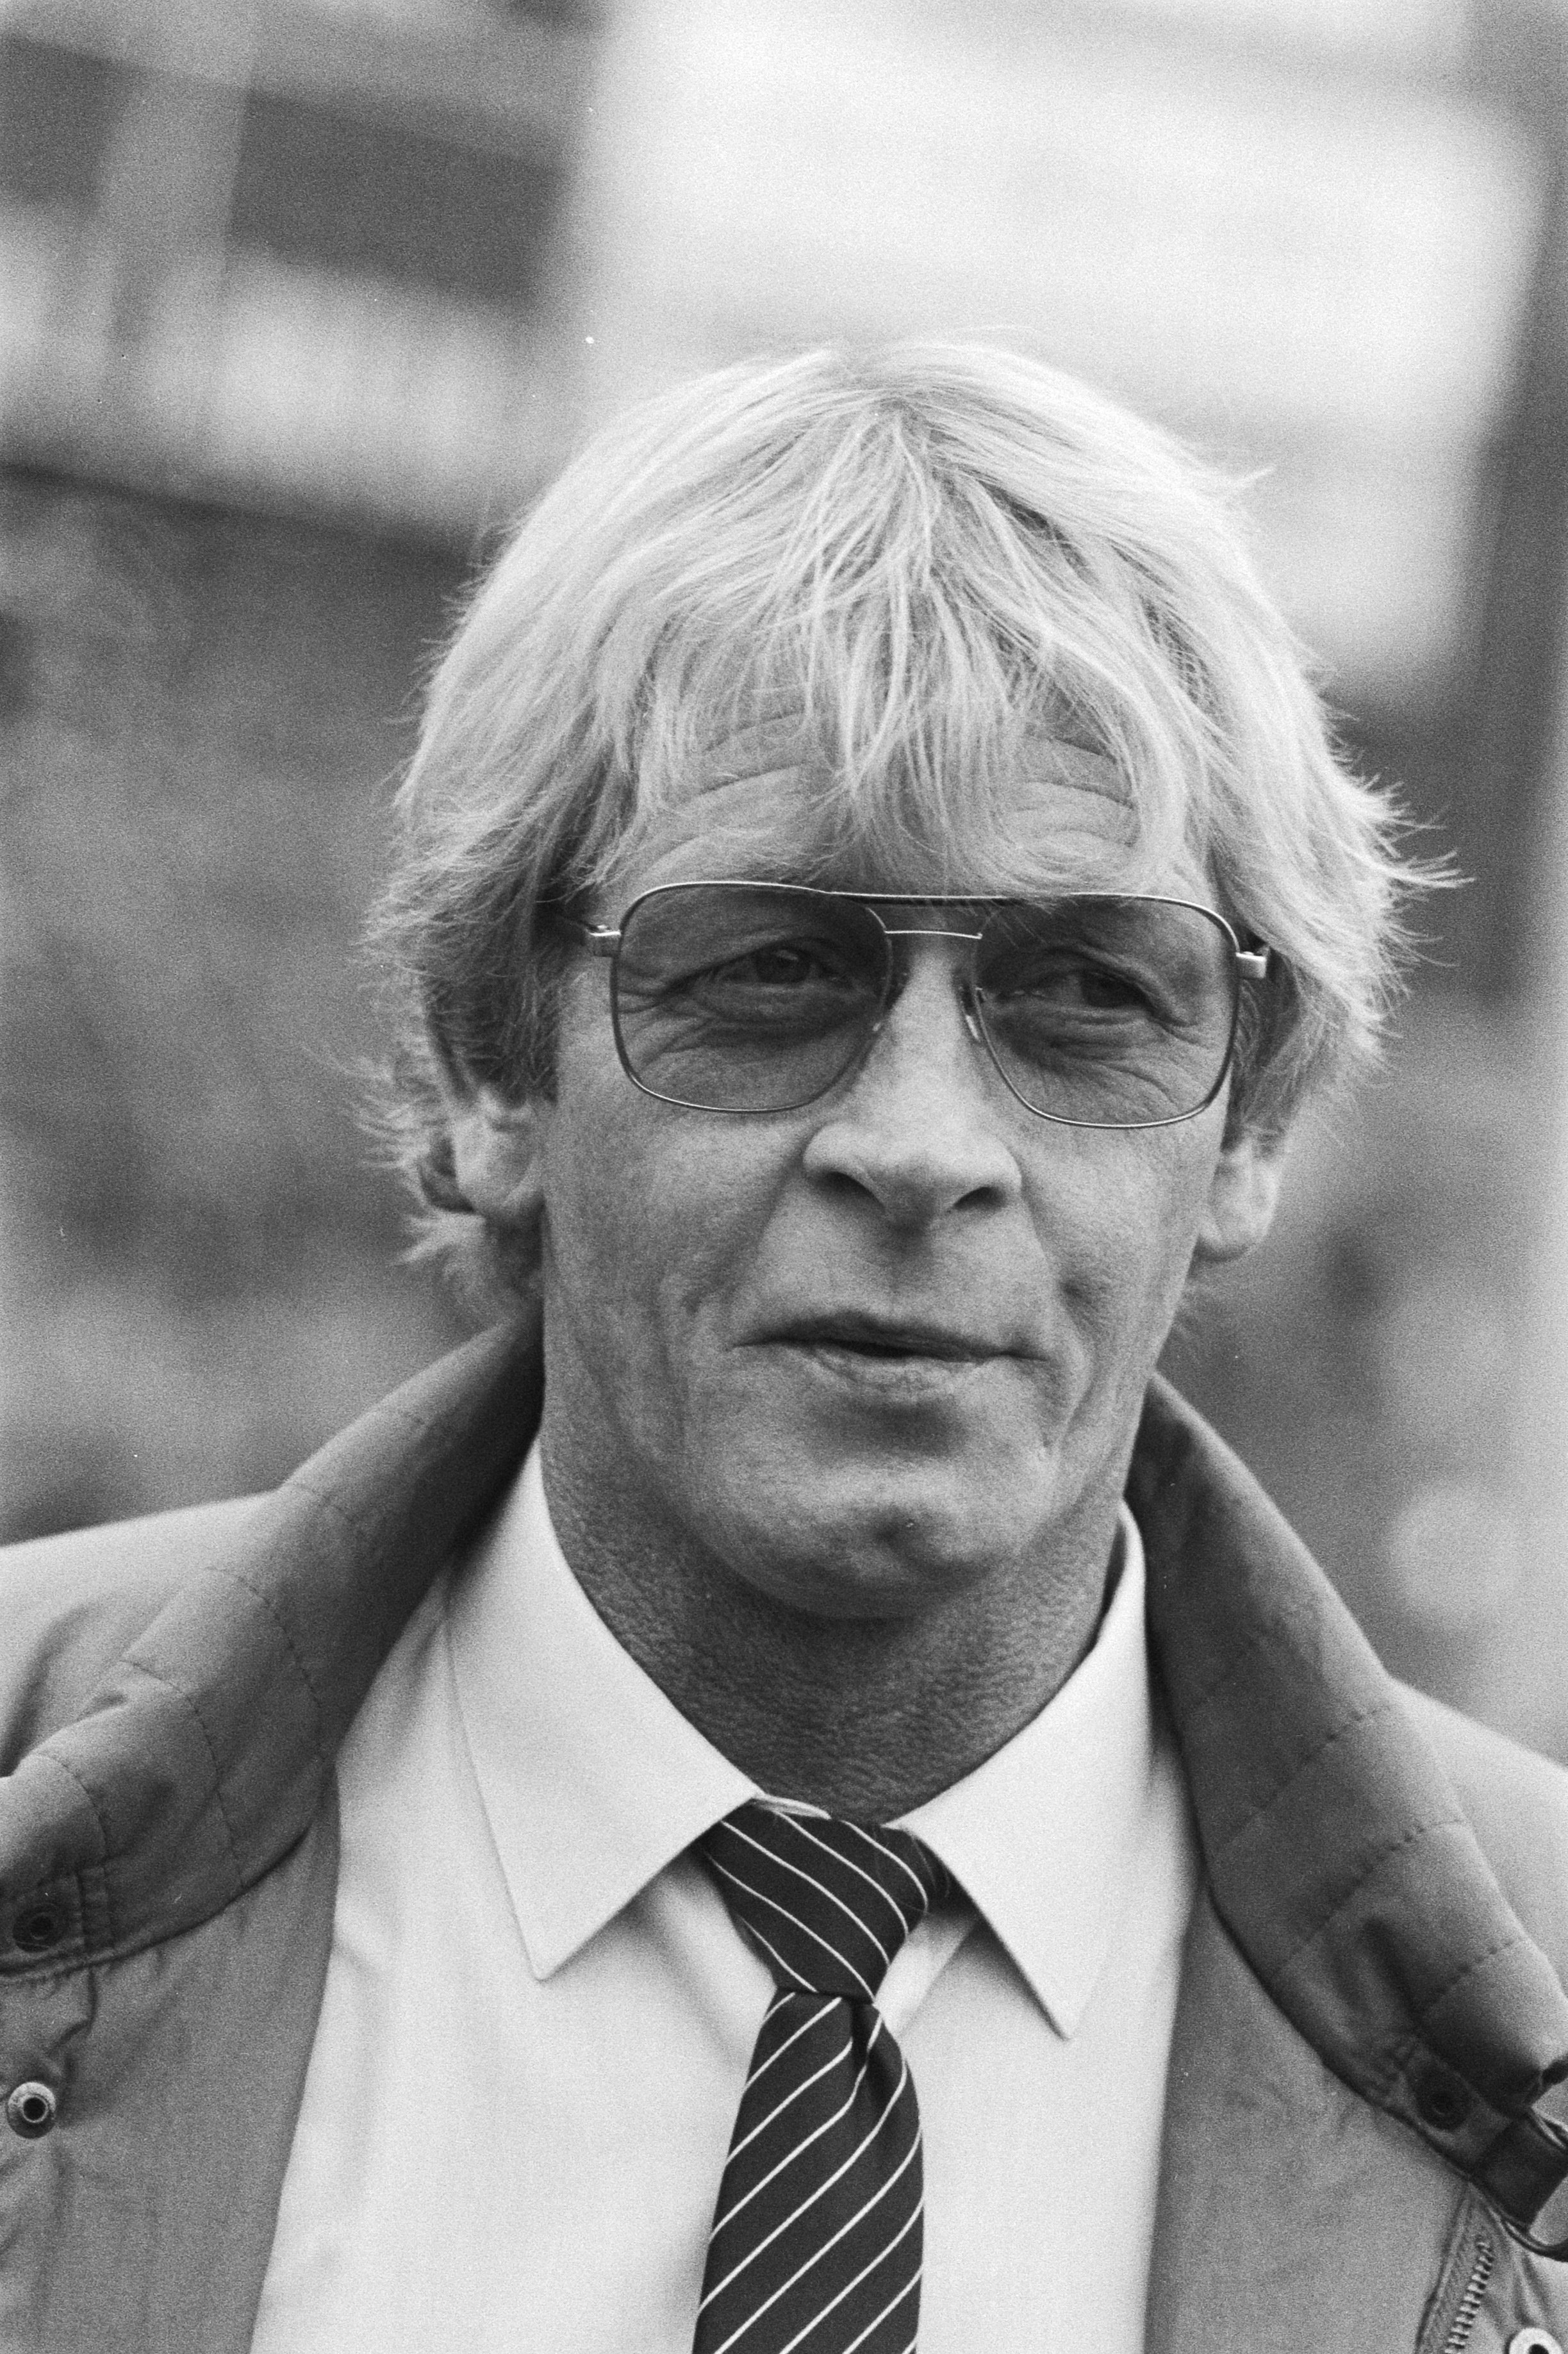 Jacobs in 1983